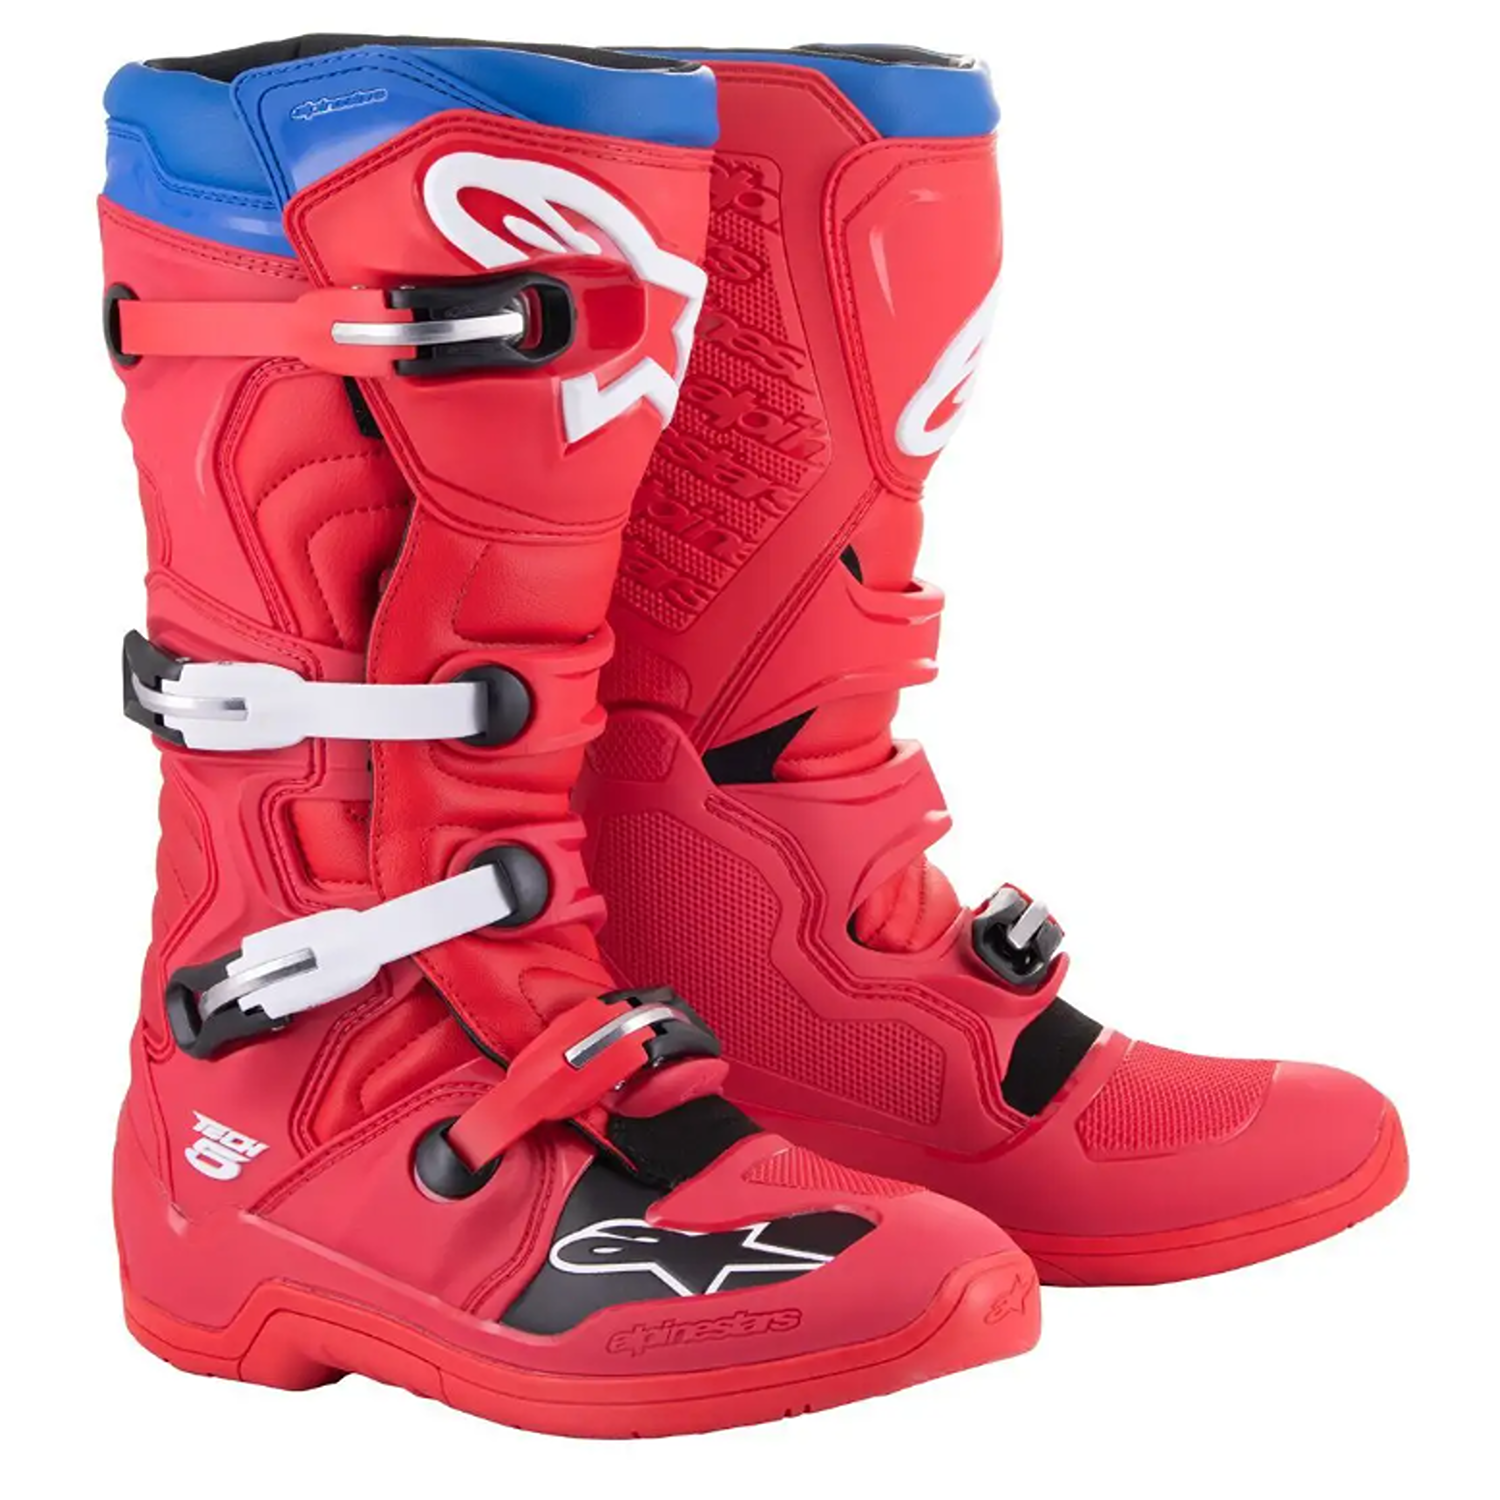 Image of Alpinestars Tech 5 Boots Bright Red Dark Red Blue Size US 15 ID 8059347199405